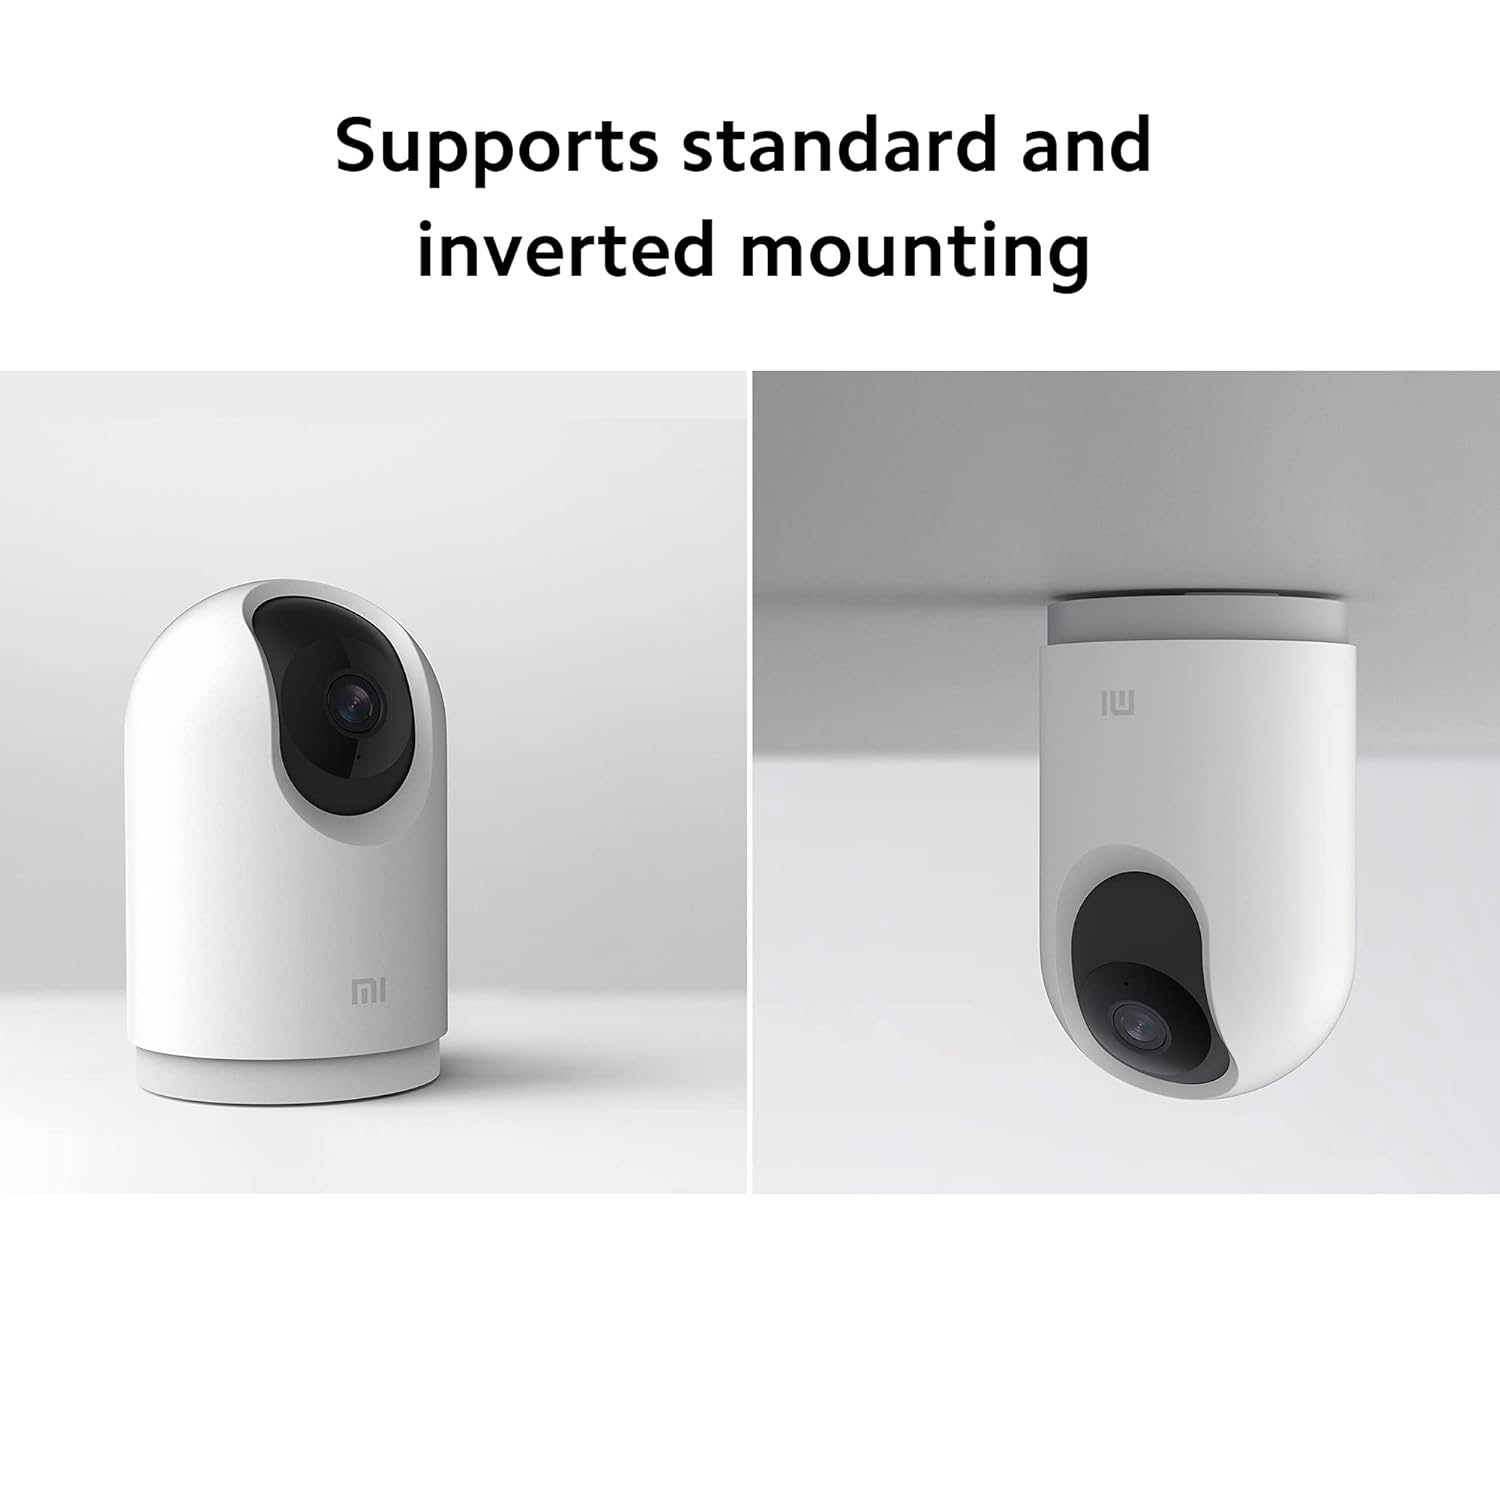 (Open Box) Mi 360 Home Security Wireless Camera 2K Pro with Bluetooth Gateway BLE 4.2 l Dual Band Wi-fi Connection l 3 Million HD 1296p| 3MP CCTV |Full Color in Low-Light | AI Human Detection, White (Grade - A+)